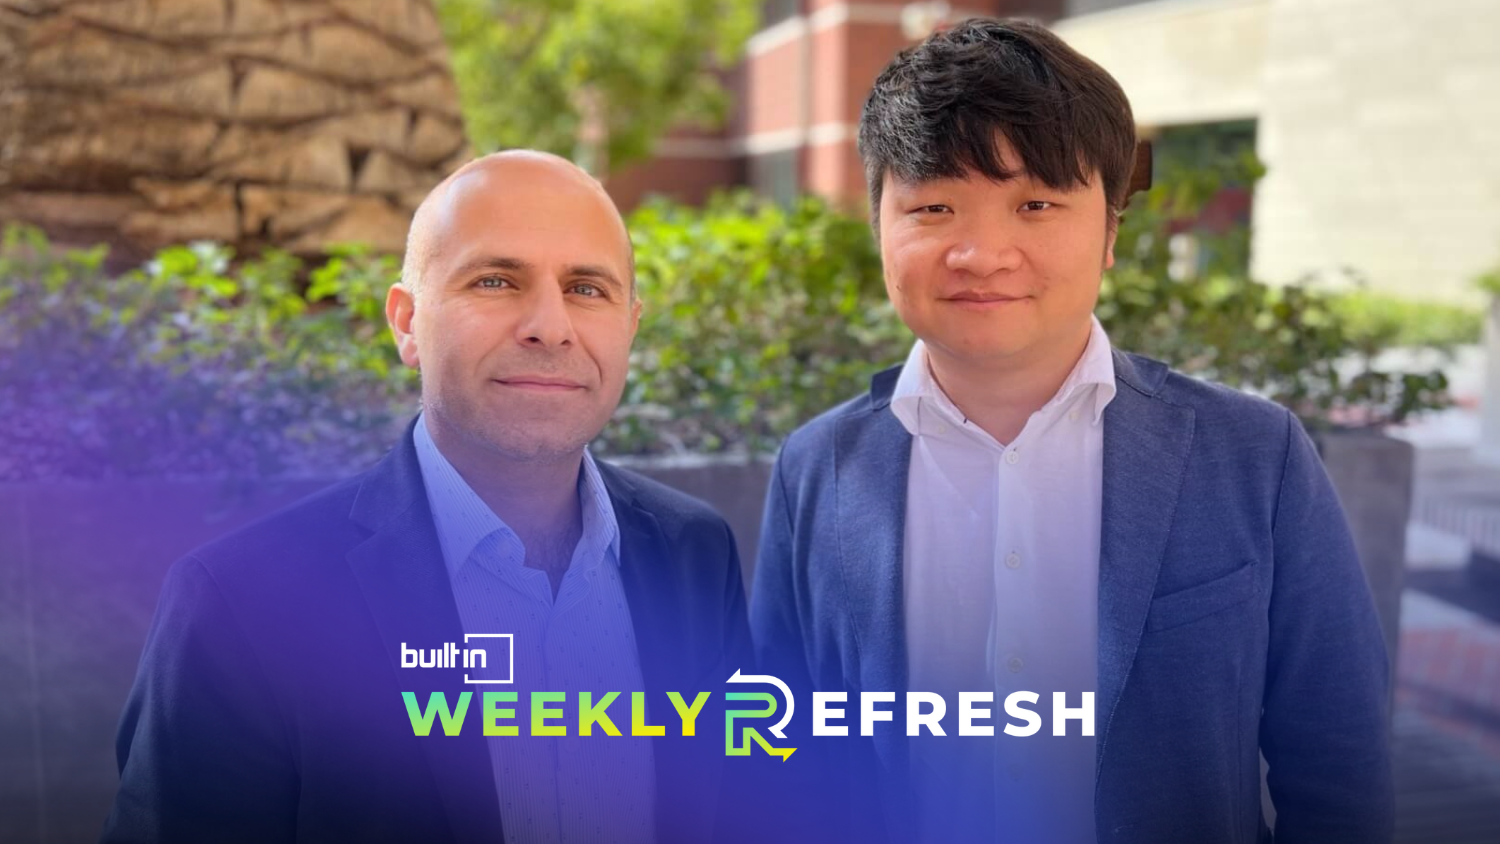 FedML co-founders Salman Avestimehr (left) and Chaoyang He (right) pose for a photo outside.